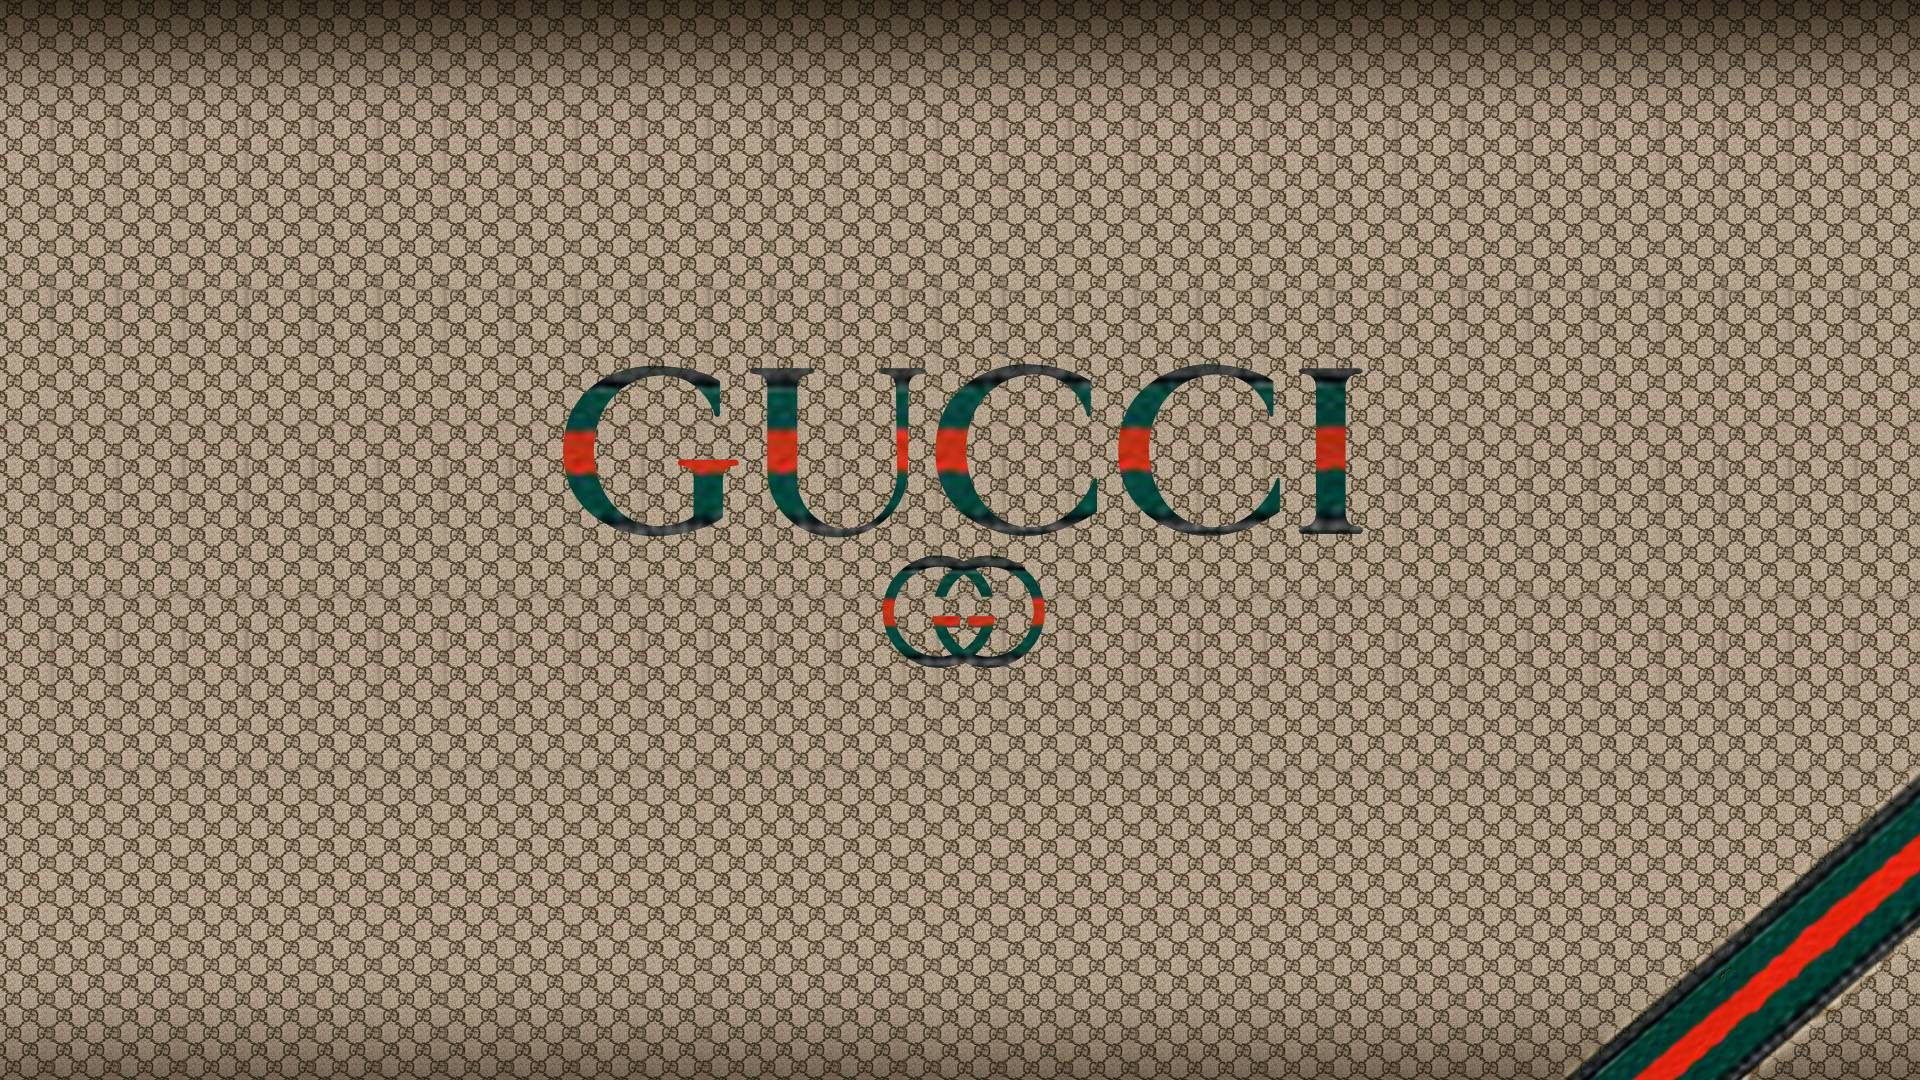 Gucci Pattern Wallpapers on WallpaperDog